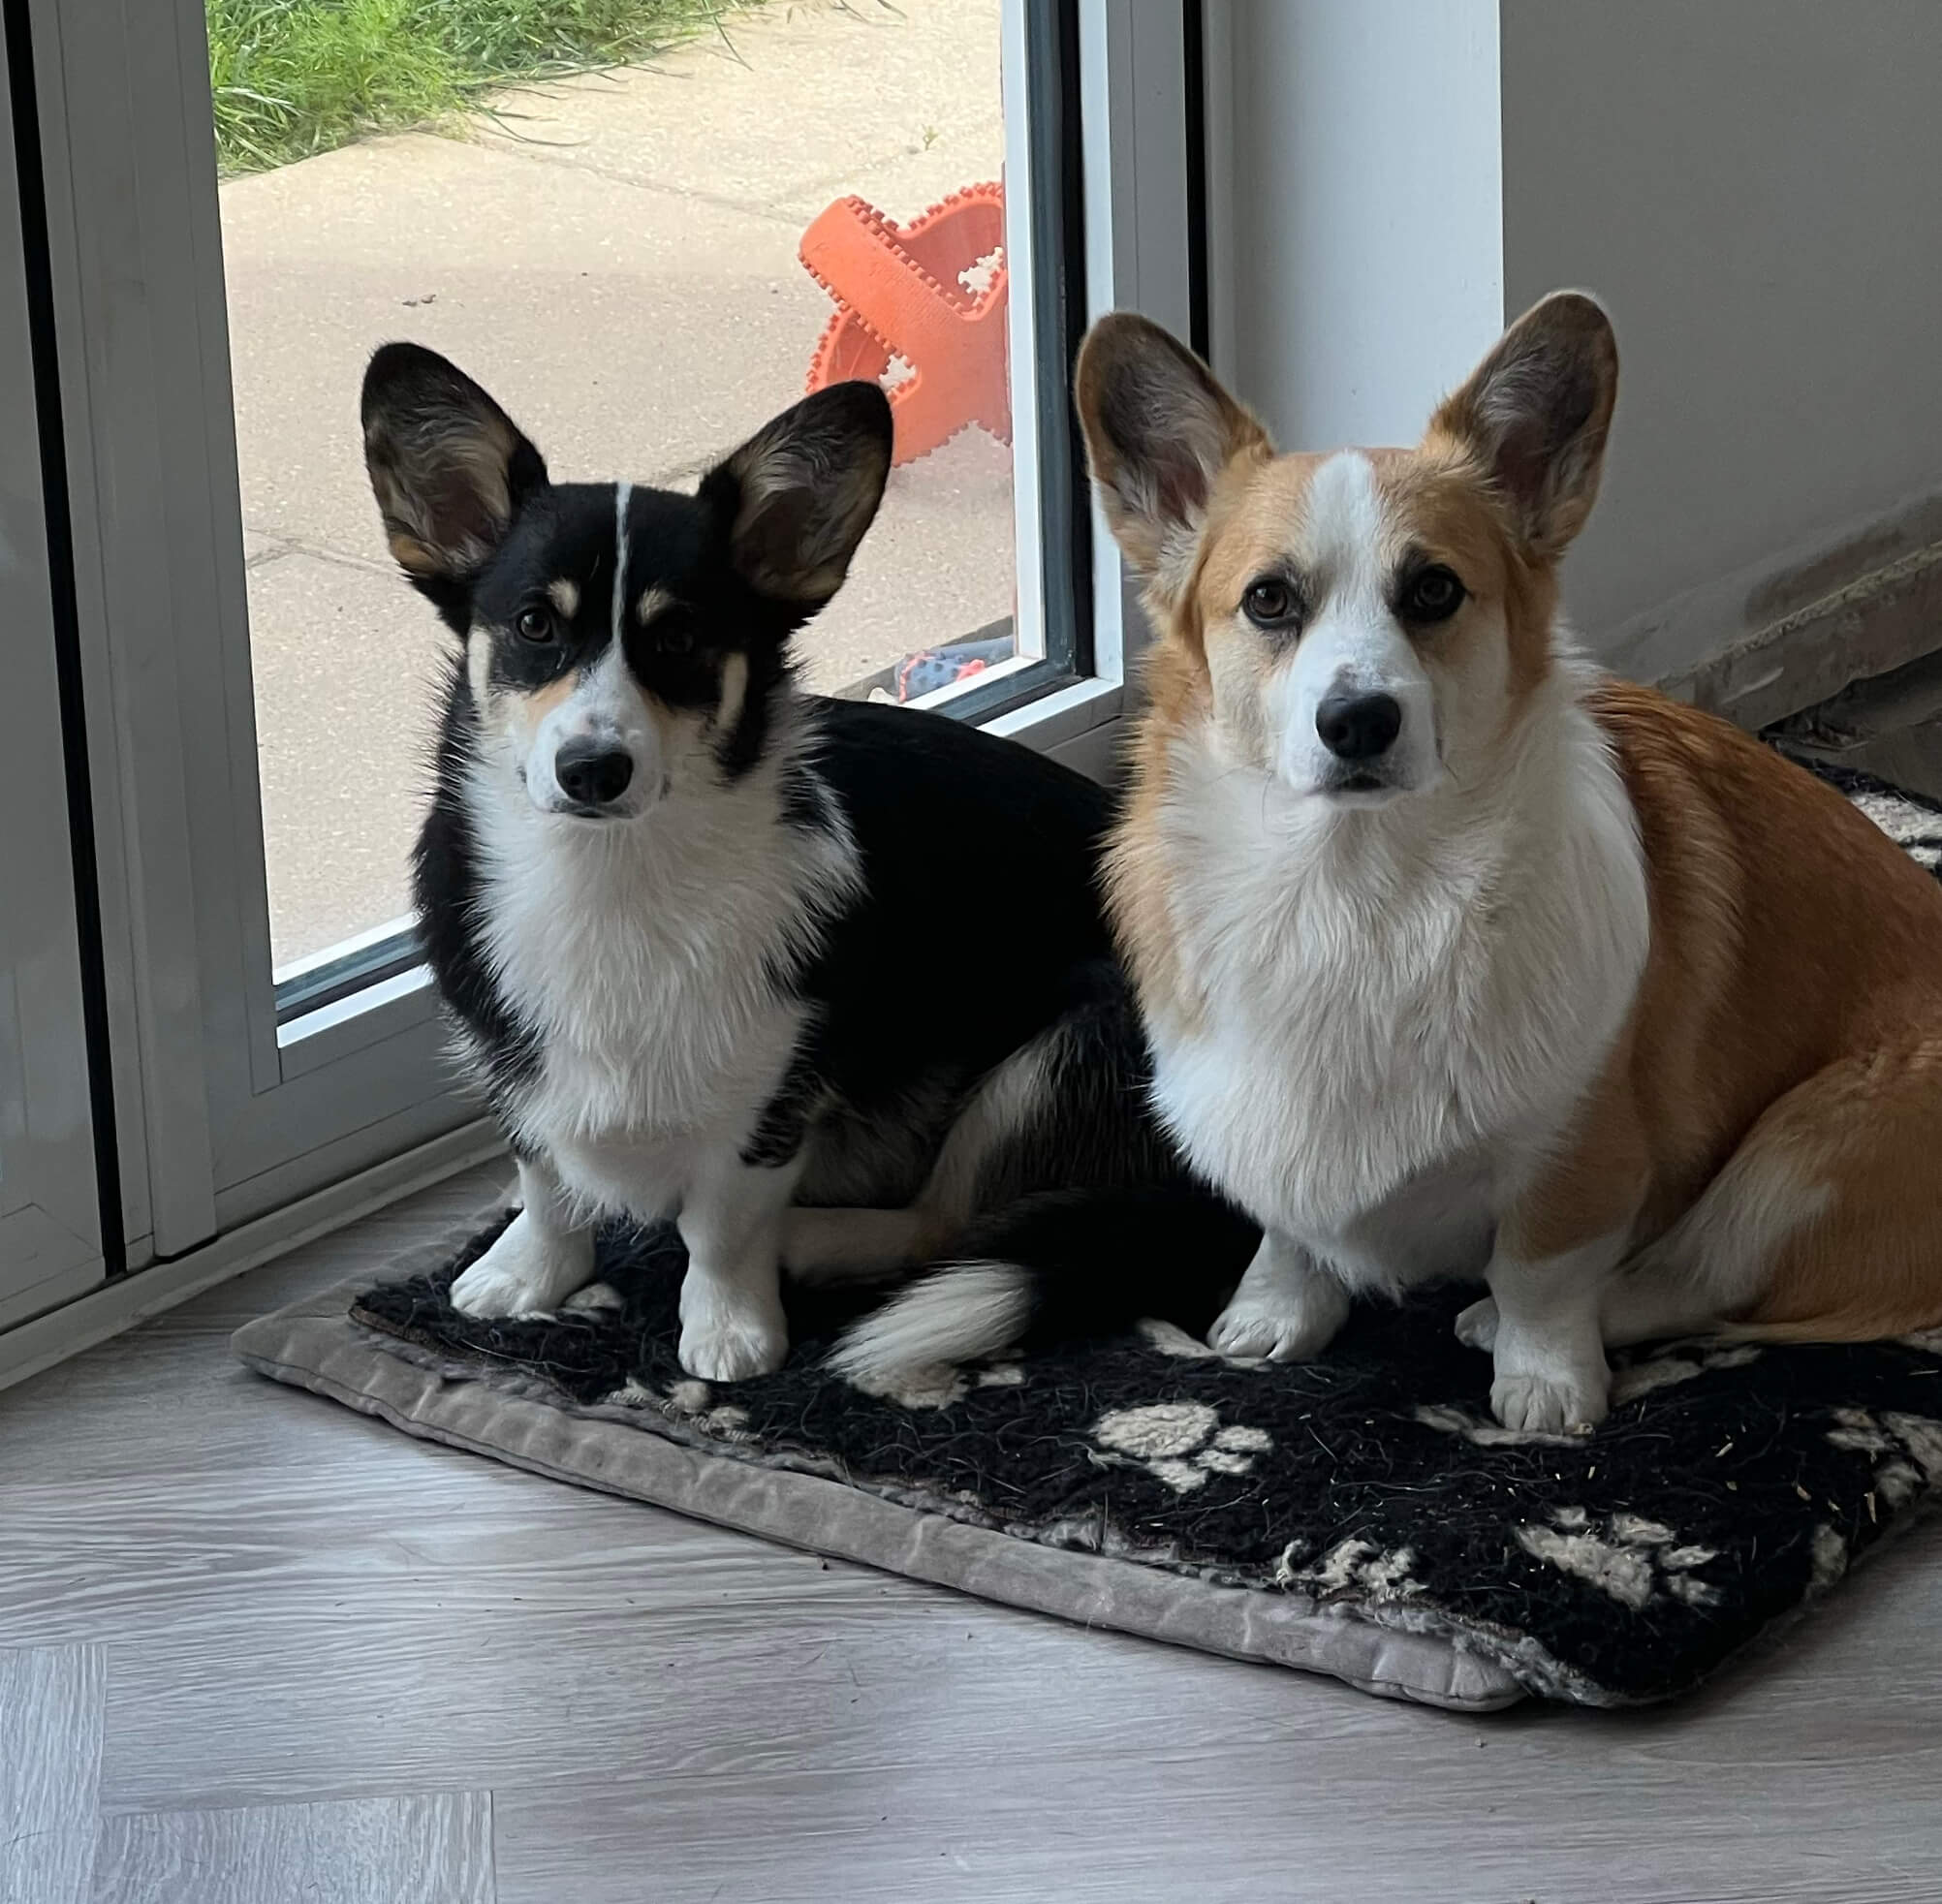 Bringing Corgi Dogs into an Events Business